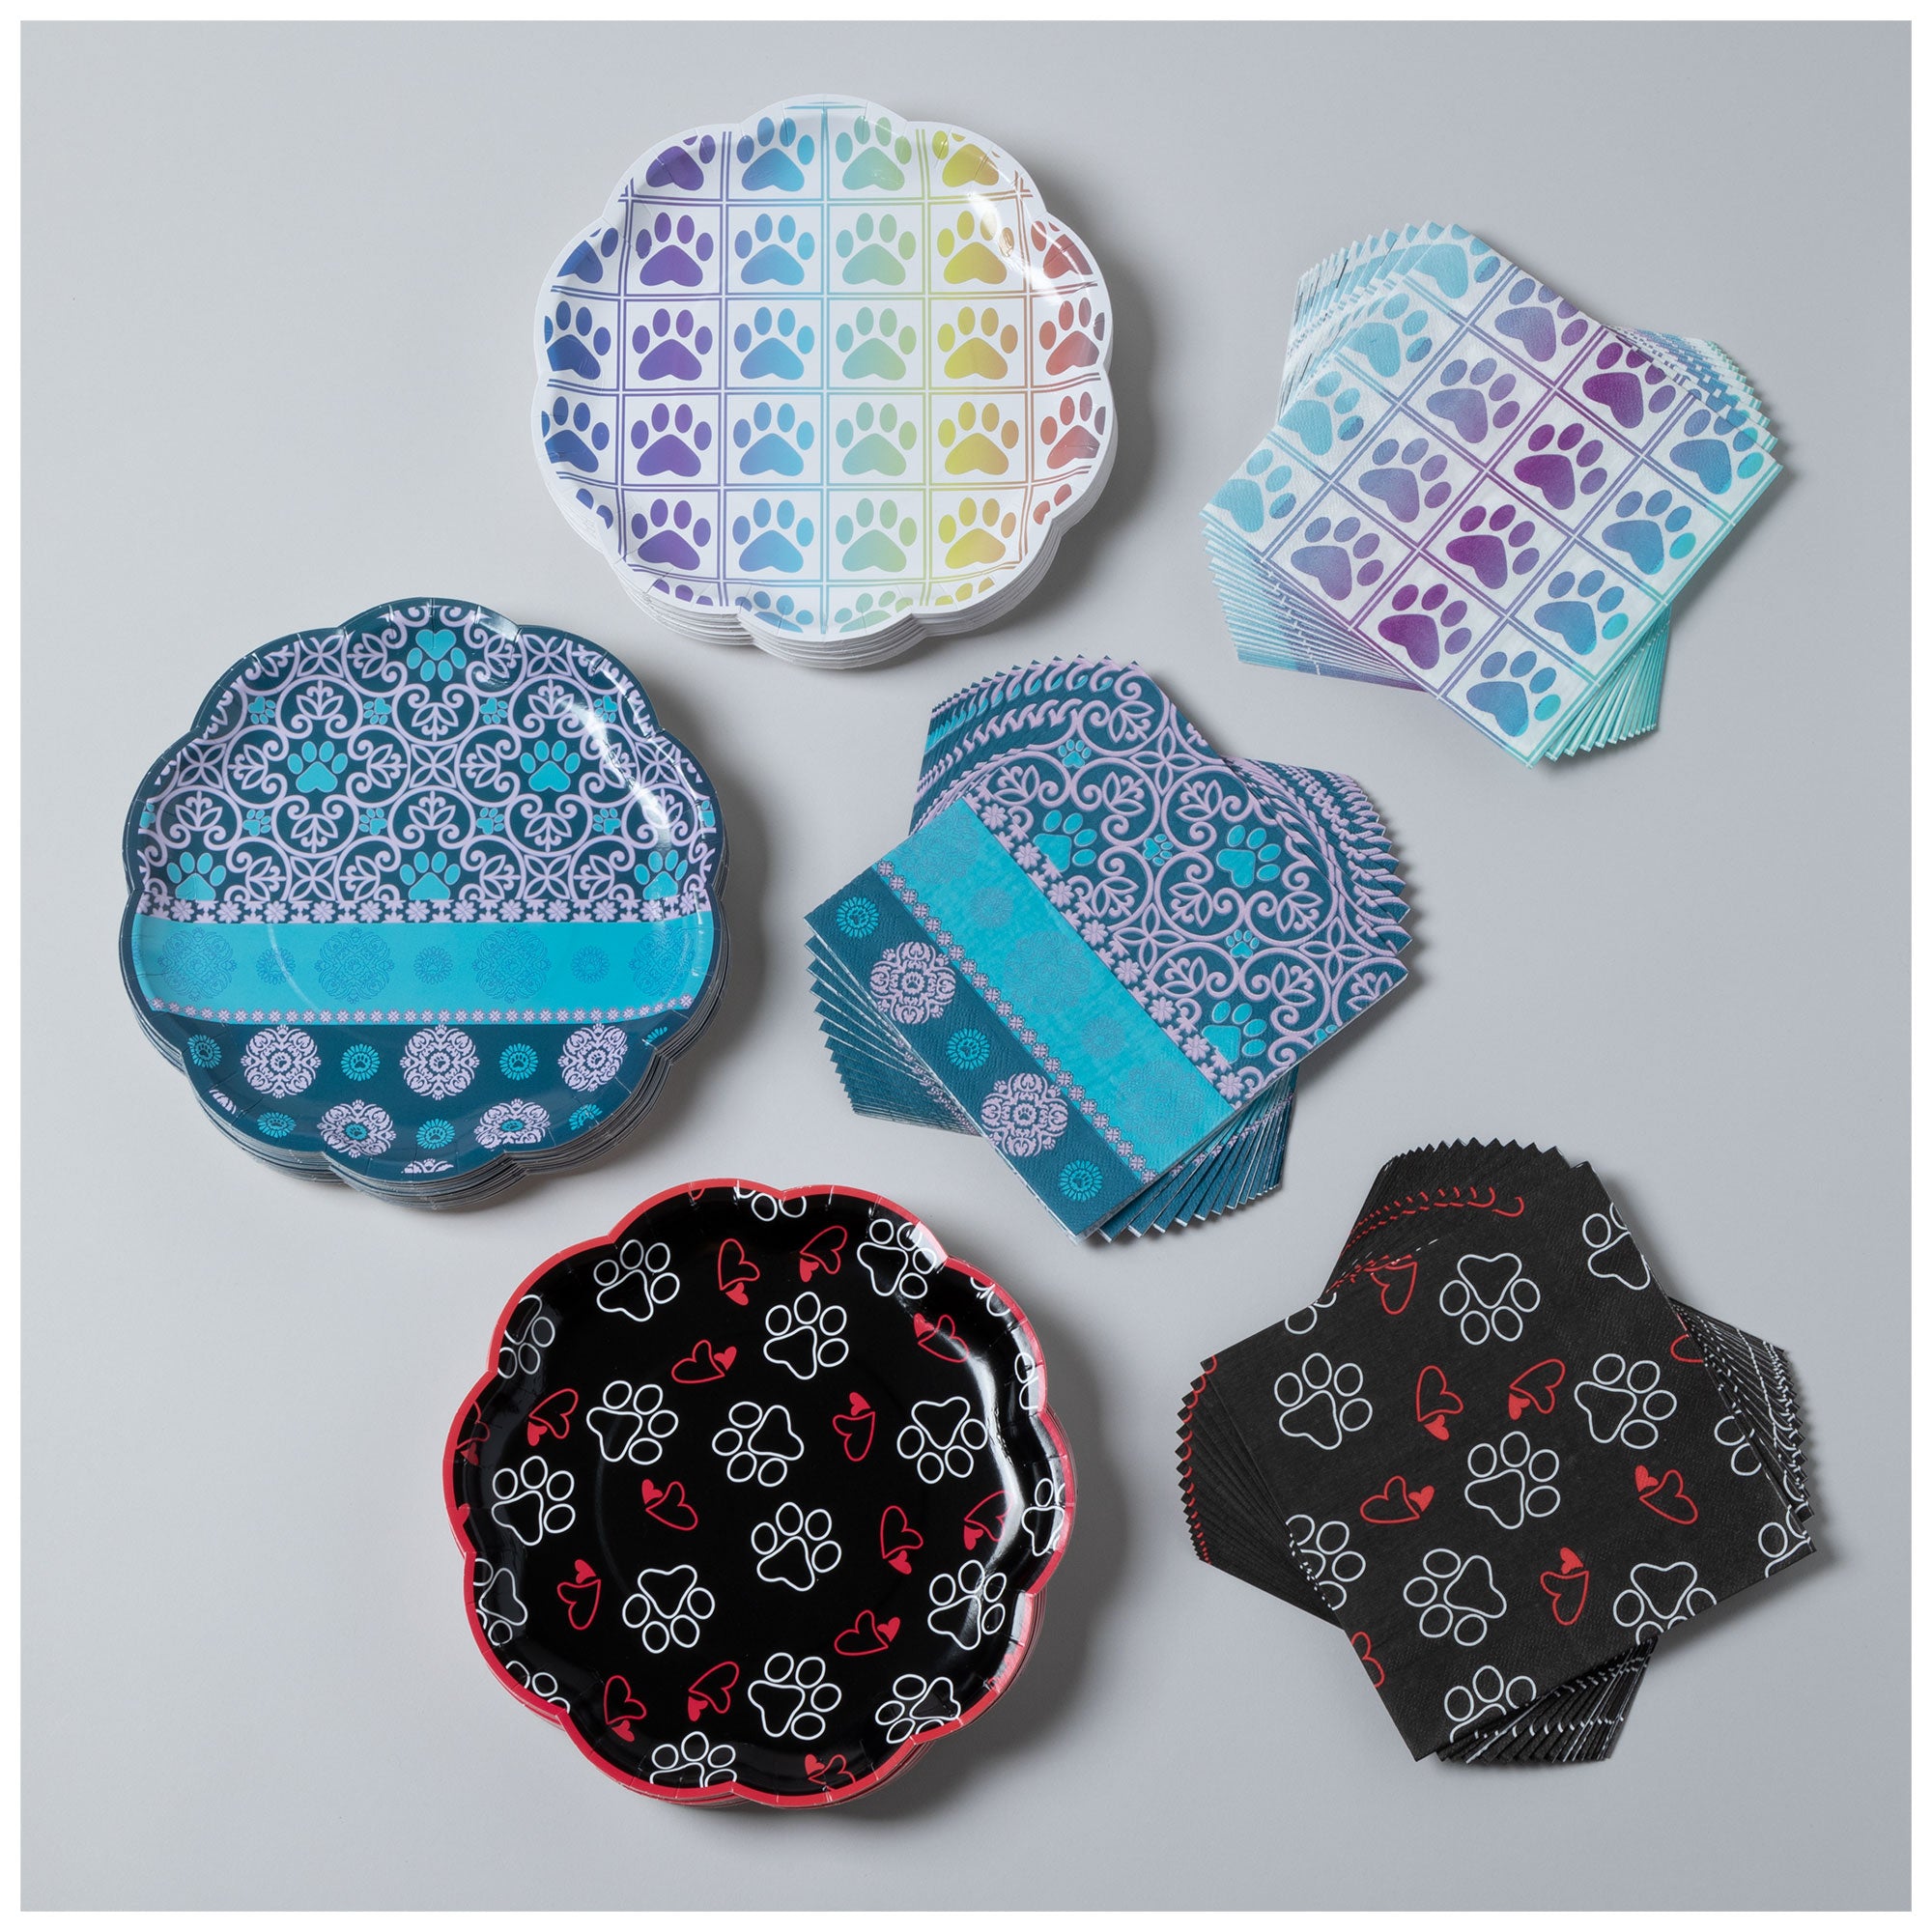 Pawfect Occasion Paper Plates & Napkins - Perfectly Patterned Paws - Napkins & Plates